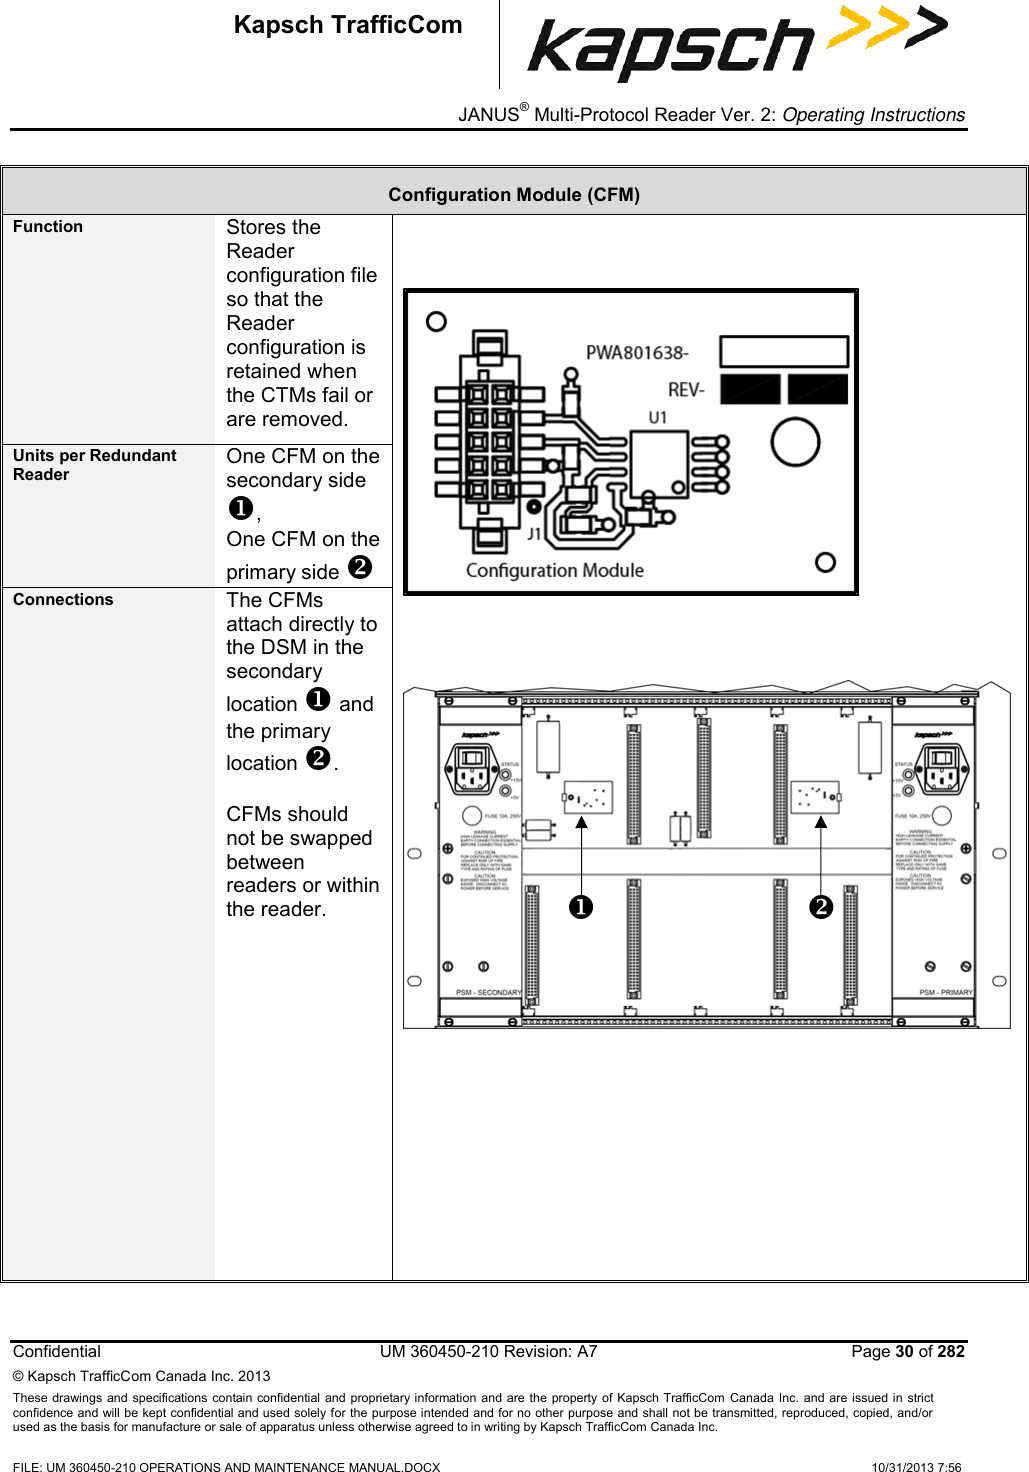 _ JANUS® Multi-Protocol Reader Ver. 2: Operating Instructions  Confidential  UM 360450-210 Revision: A7   Page 30 of 282 © Kapsch TrafficCom Canada Inc. 2013 These  drawings and specifications contain confidential  and  proprietary information and are  the  property of Kapsch TrafficCom  Canada Inc.  and are issued in strict confidence and will be kept confidential and used solely for the purpose intended and for no other purpose and shall not be transmitted, reproduced, copied, and/or used as the basis for manufacture or sale of apparatus unless otherwise agreed to in writing by Kapsch TrafficCom Canada Inc.  FILE: UM 360450-210 OPERATIONS AND MAINTENANCE MANUAL.DOCX    10/31/2013 7:56  Kapsch TrafficCom Configuration Module (CFM) Function Stores the Reader configuration file so that the Reader configuration is retained when the CTMs fail or are removed.        Units per Redundant Reader One CFM on the secondary side , One CFM on the primary side  Connections The CFMs attach directly to the DSM in the secondary location  and the primary location .  CFMs should not be swapped between readers or within the reader.       